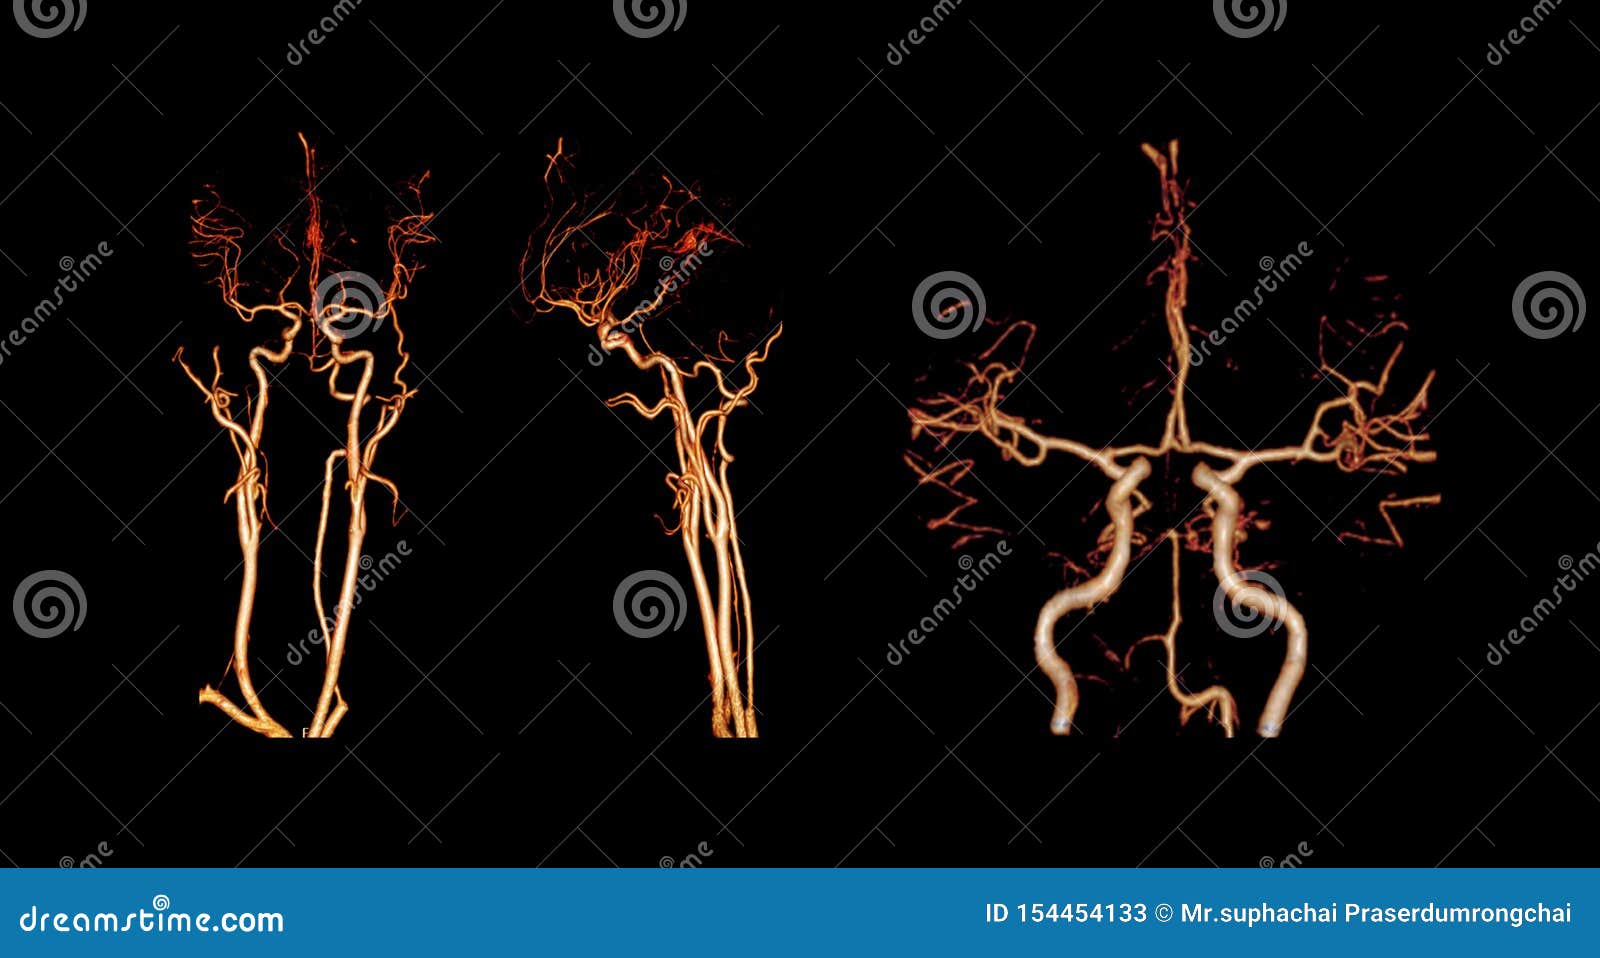 cta brain os ct angiography of the brain  3d rendering image.